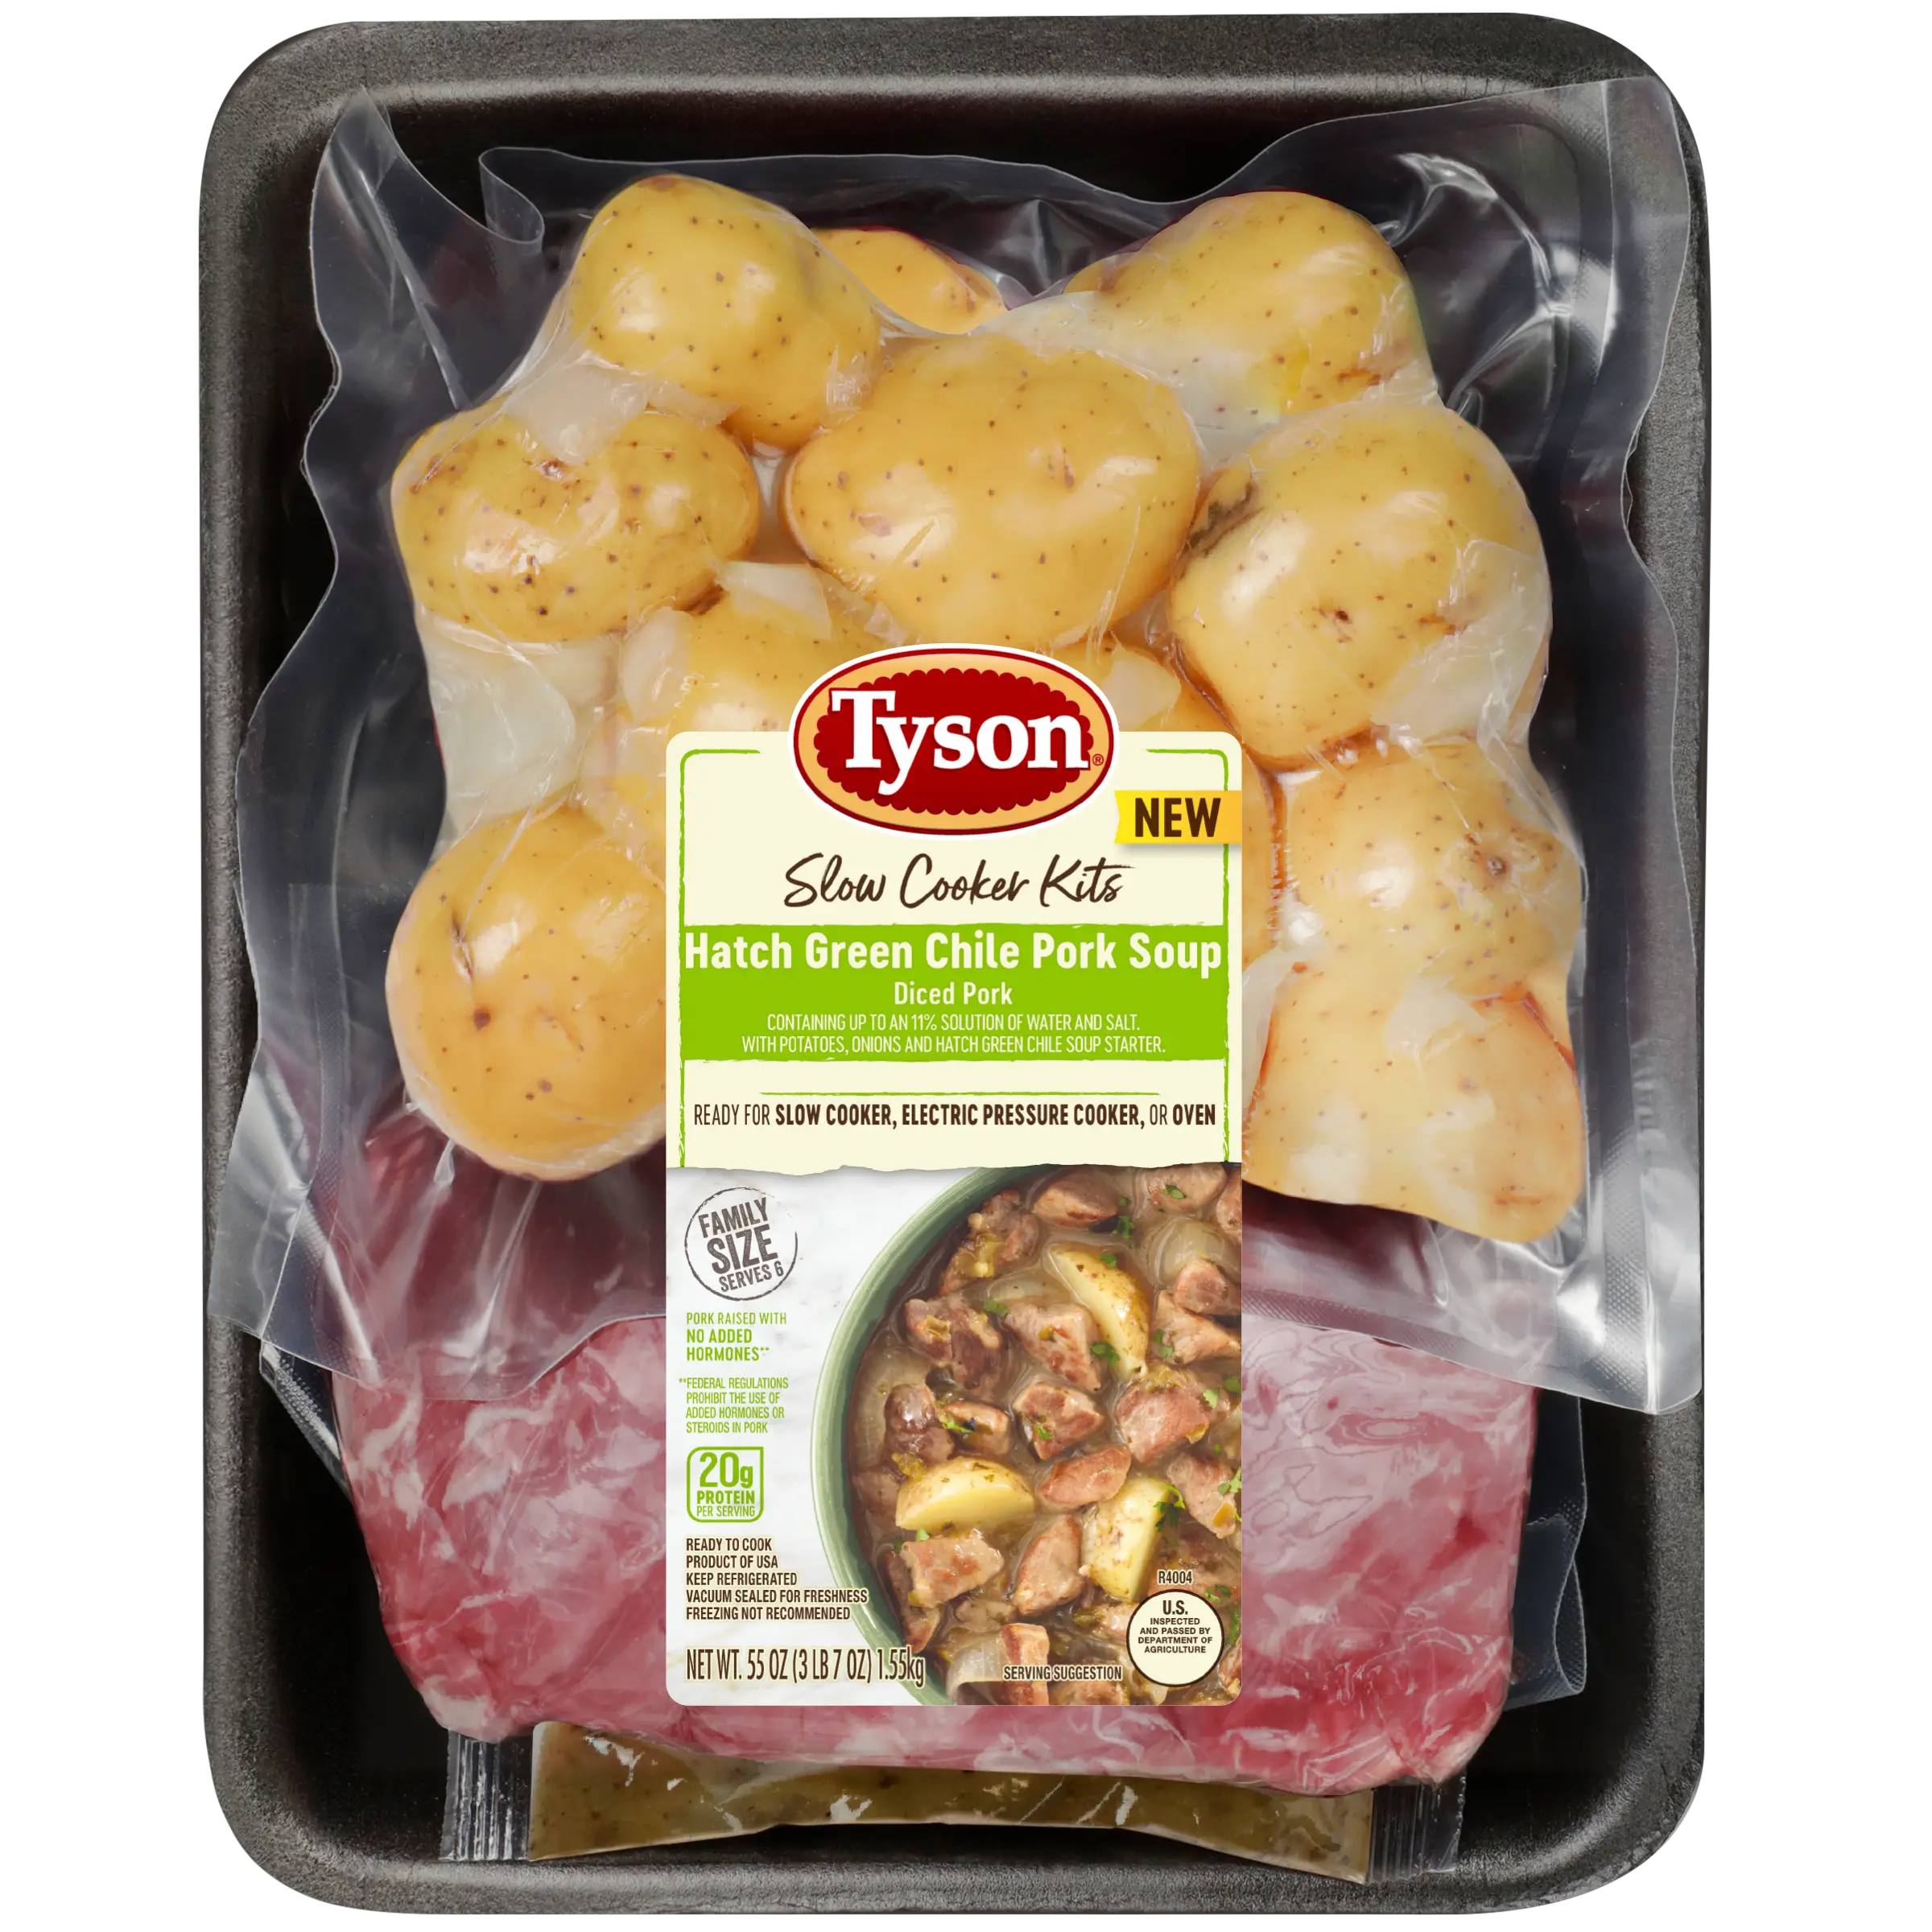 Tyson® Slow Cooker Kits Hatch Green Chile Pork Soup, Diced Pork with ...